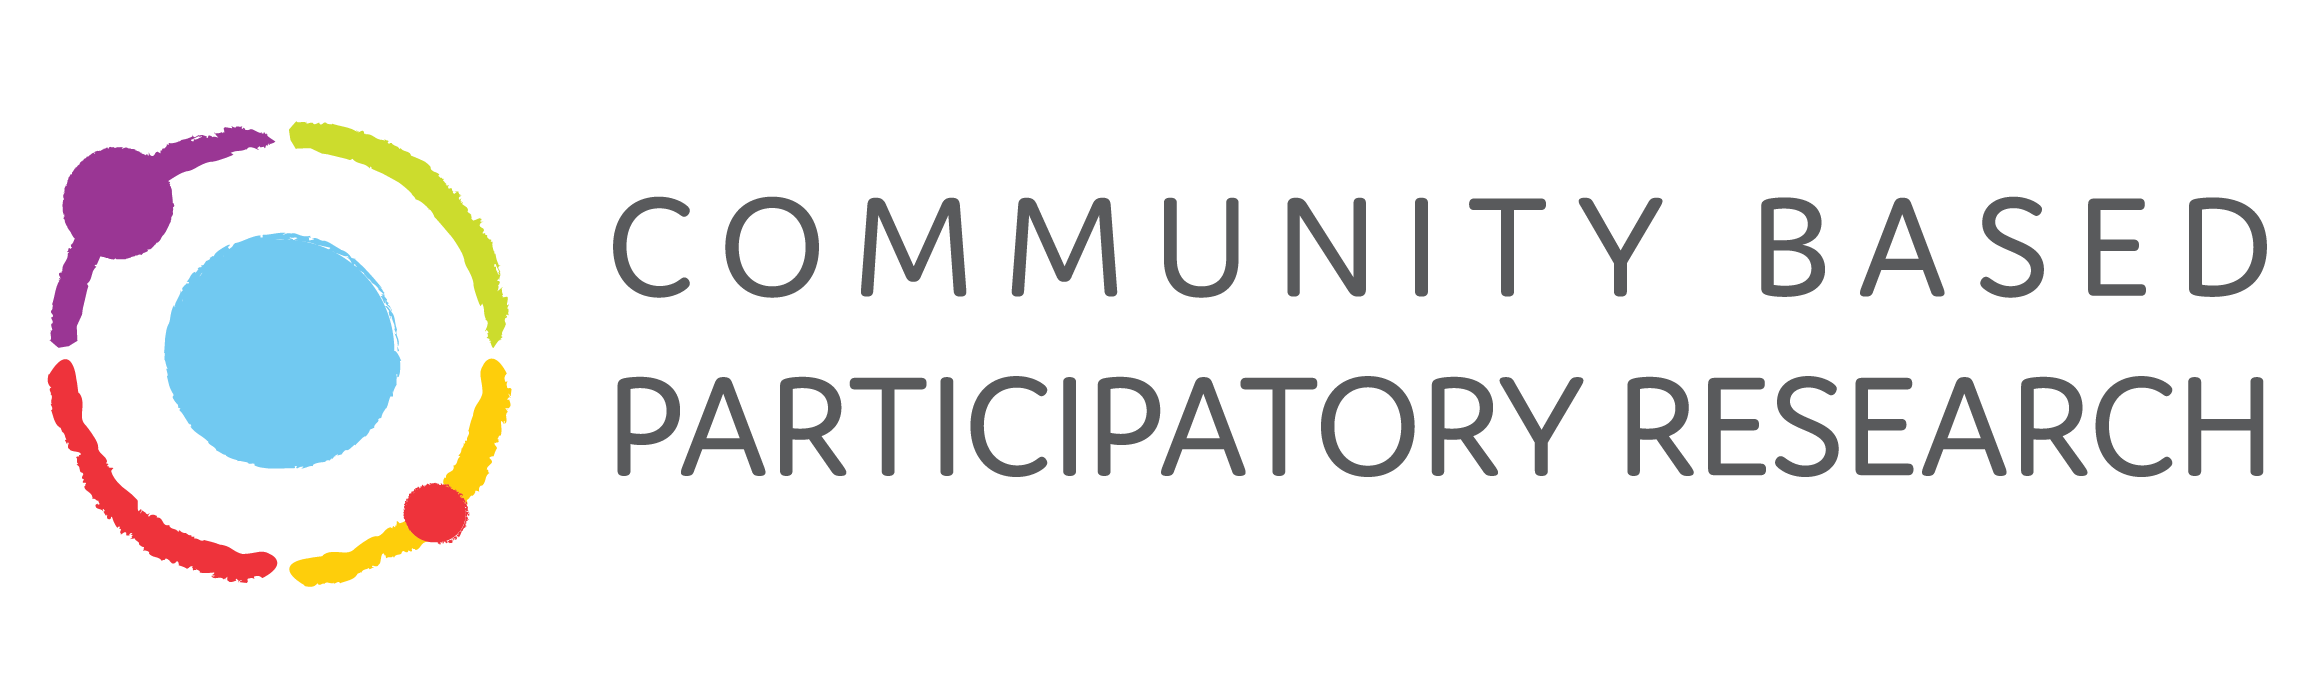 Community Based Participatory Research Toolkit logo